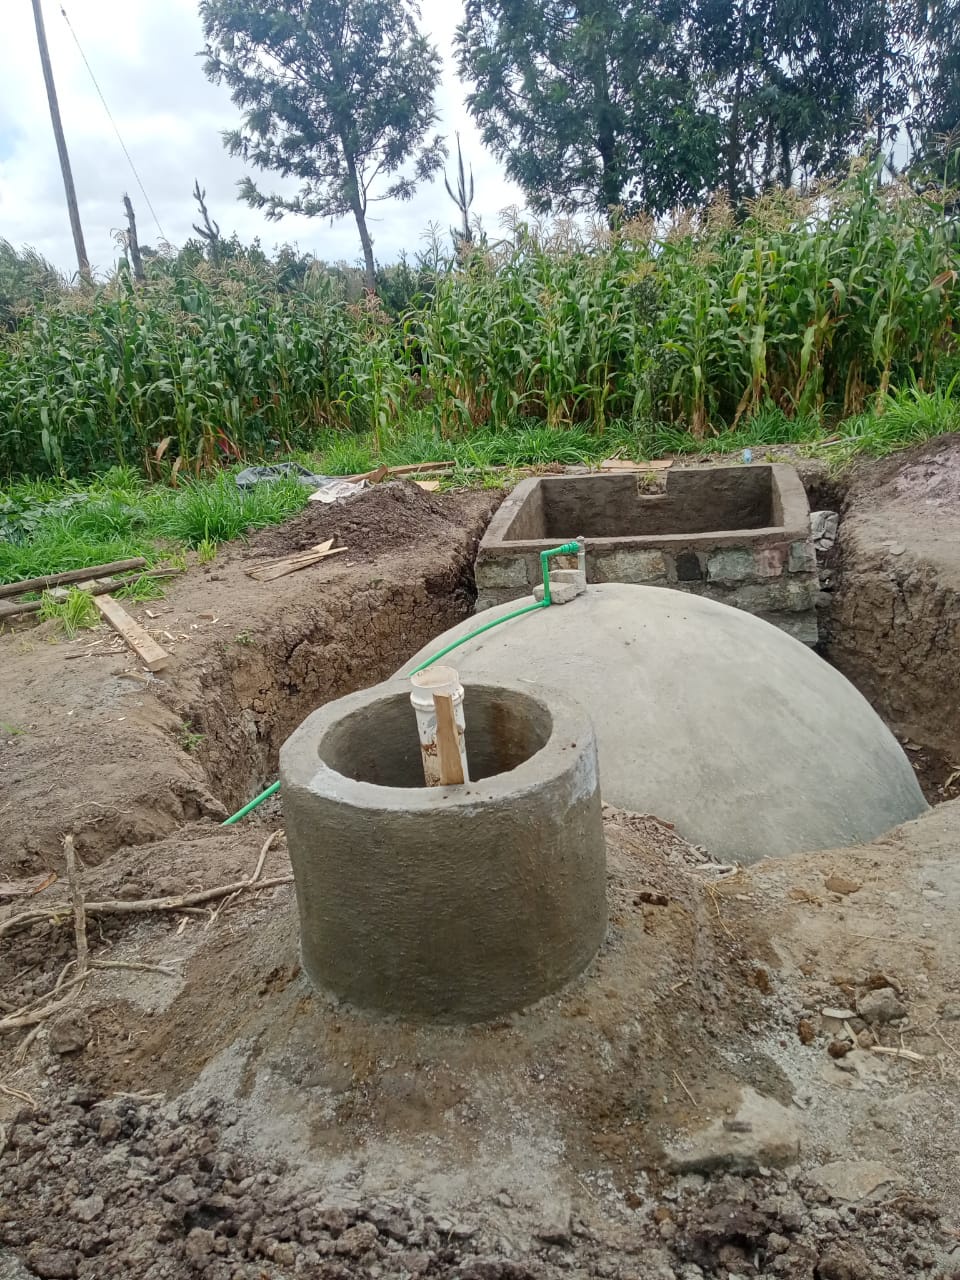 Economic Considerations of Biodigesters: Turning Waste into Wealth